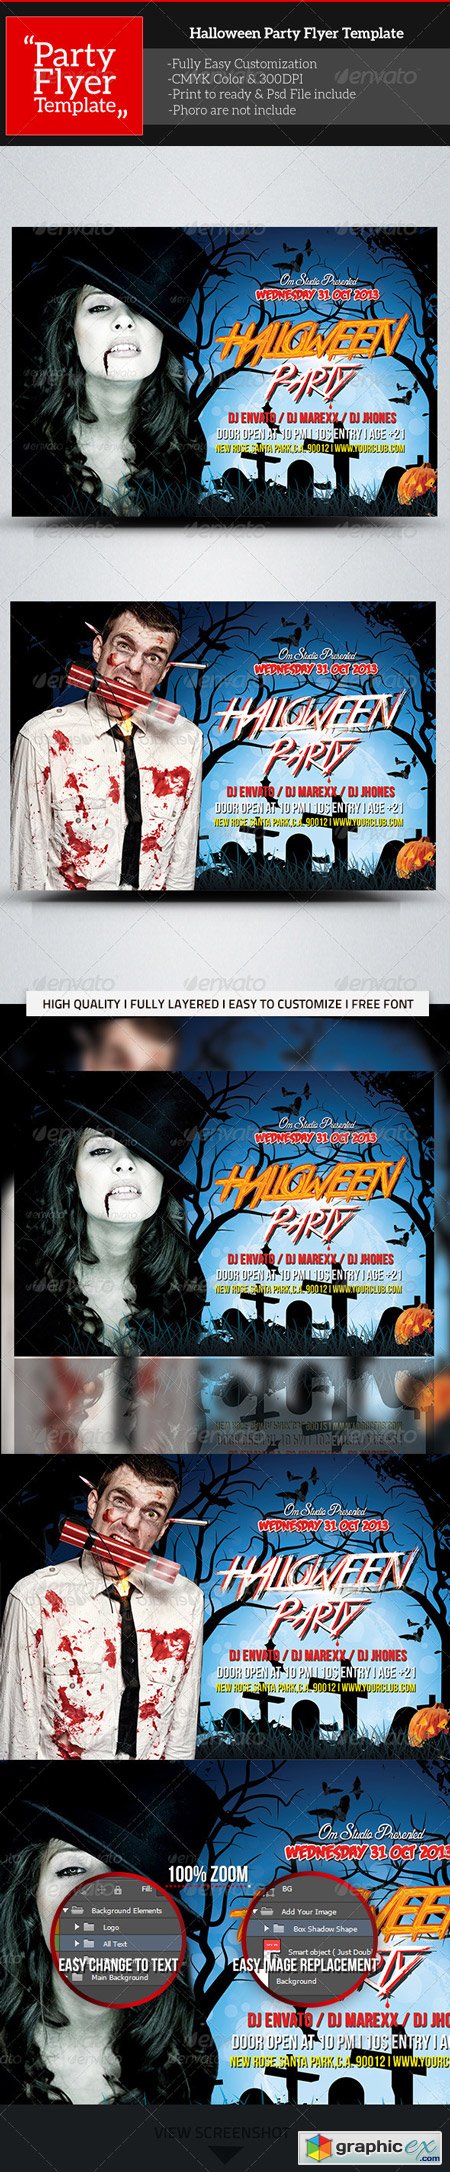 Halloween Party Flyer Template 5740598